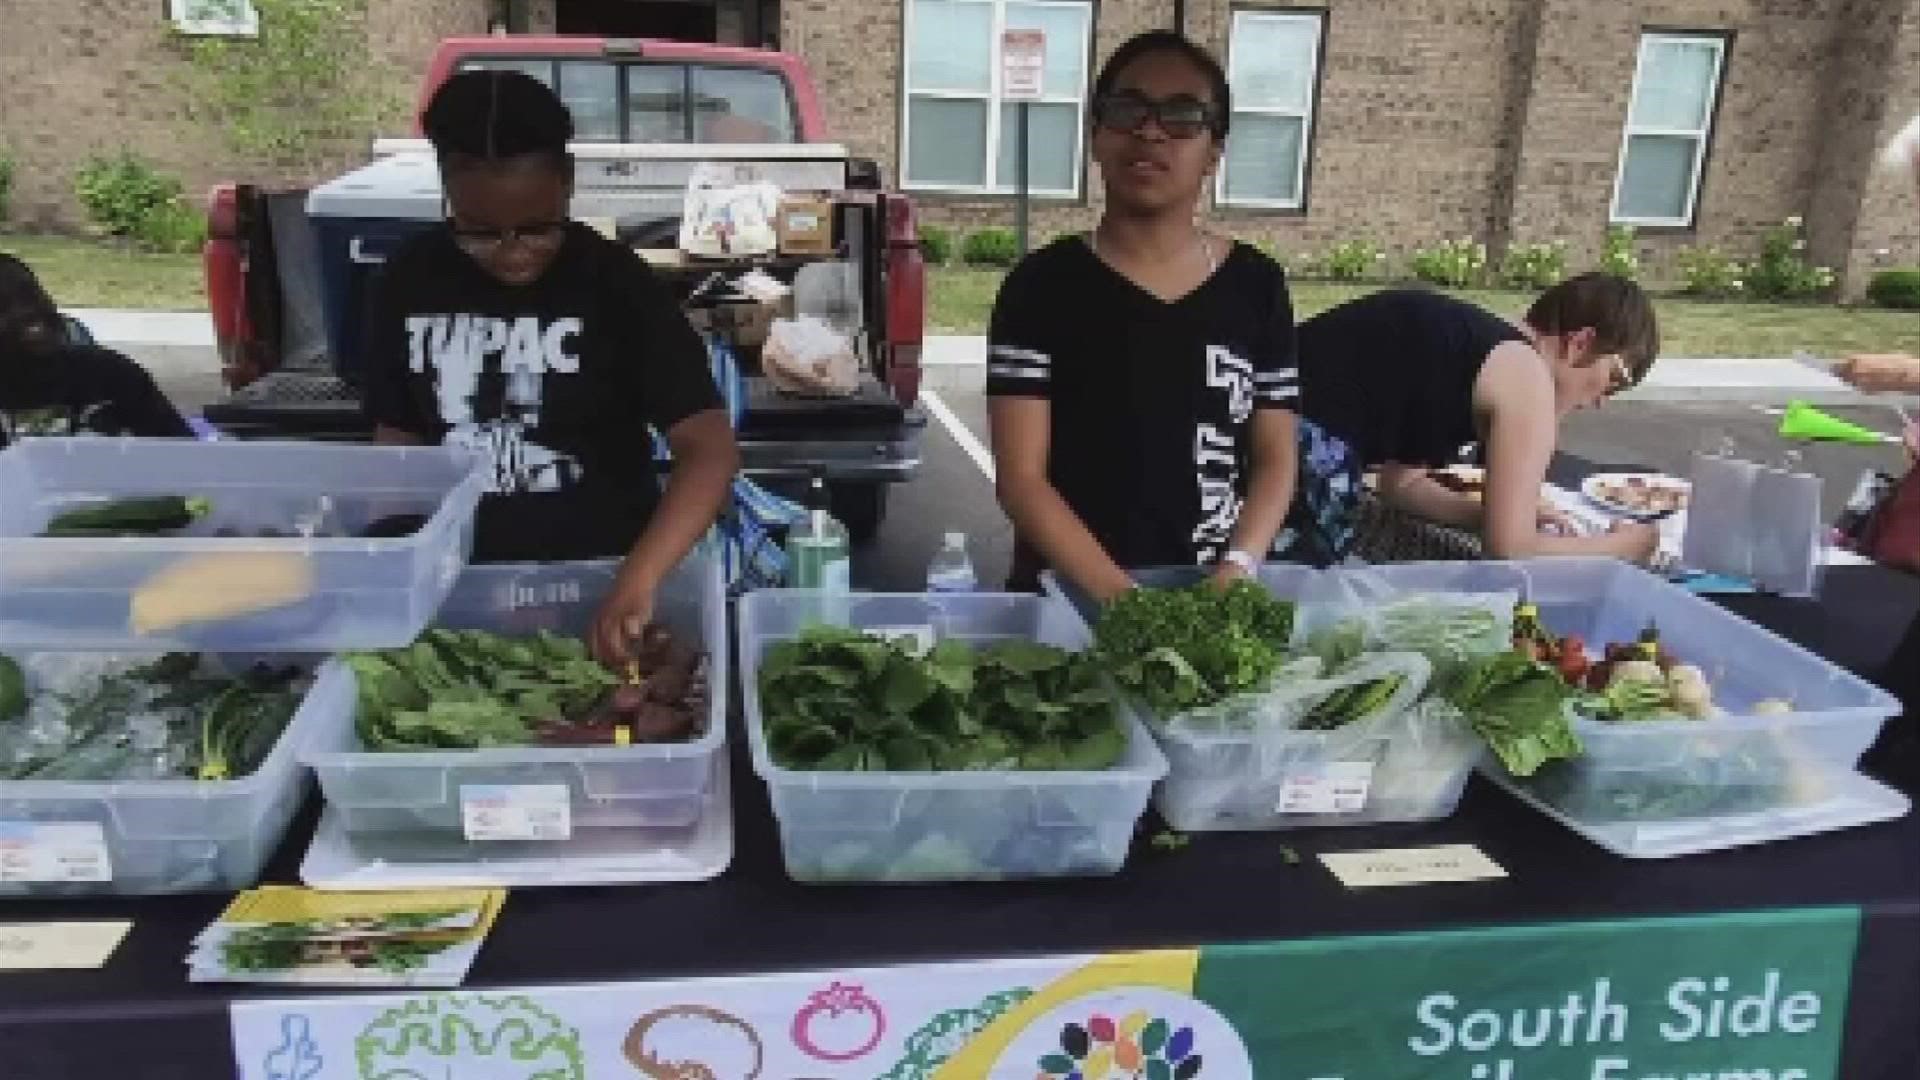 South Side Family Farms is working hard to provide nutritious foods to the underserved.